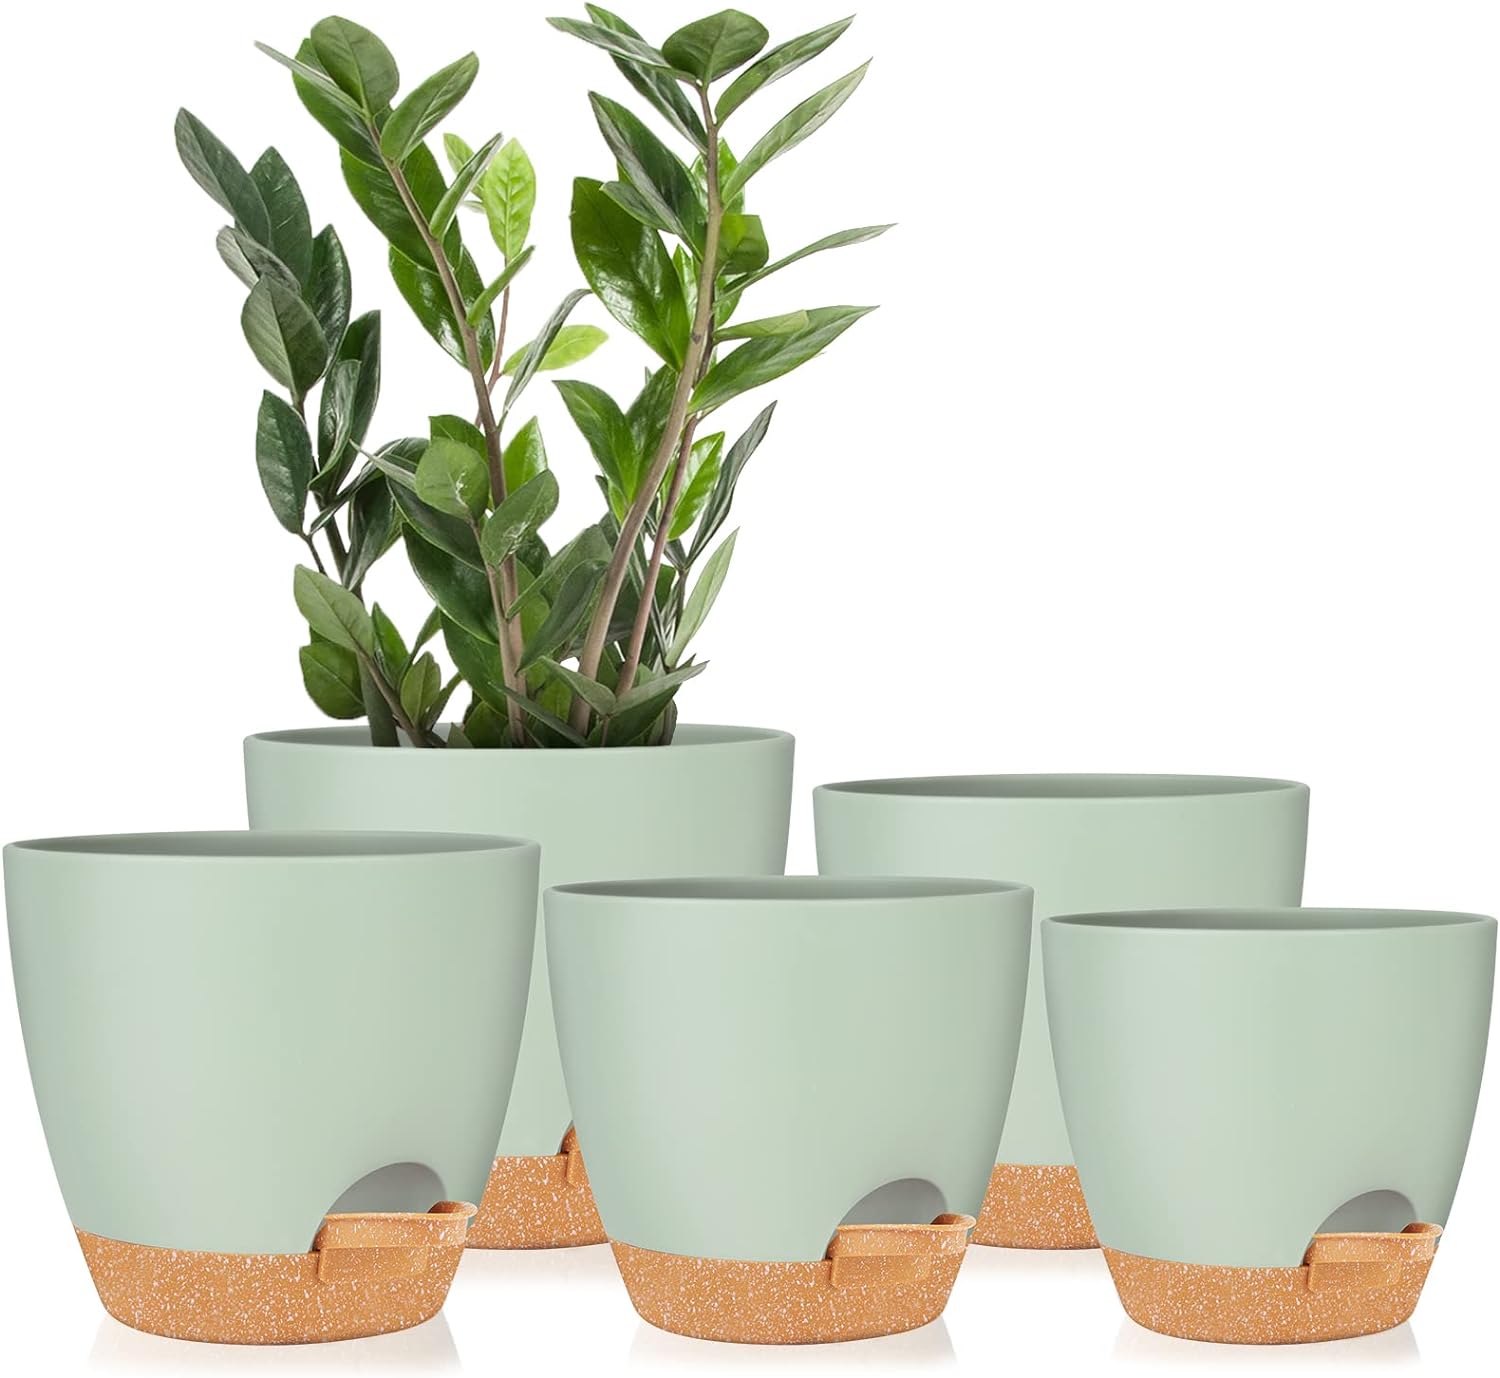 GARDIFE Plant Pots 7/6.5/6/5.5/5 Inch Self Watering Planters with Drainage Hole, Plastic Flower Pots, Planters for Indoor Plants, Succulents,Snake Plant, African Violet, Flowers,Green